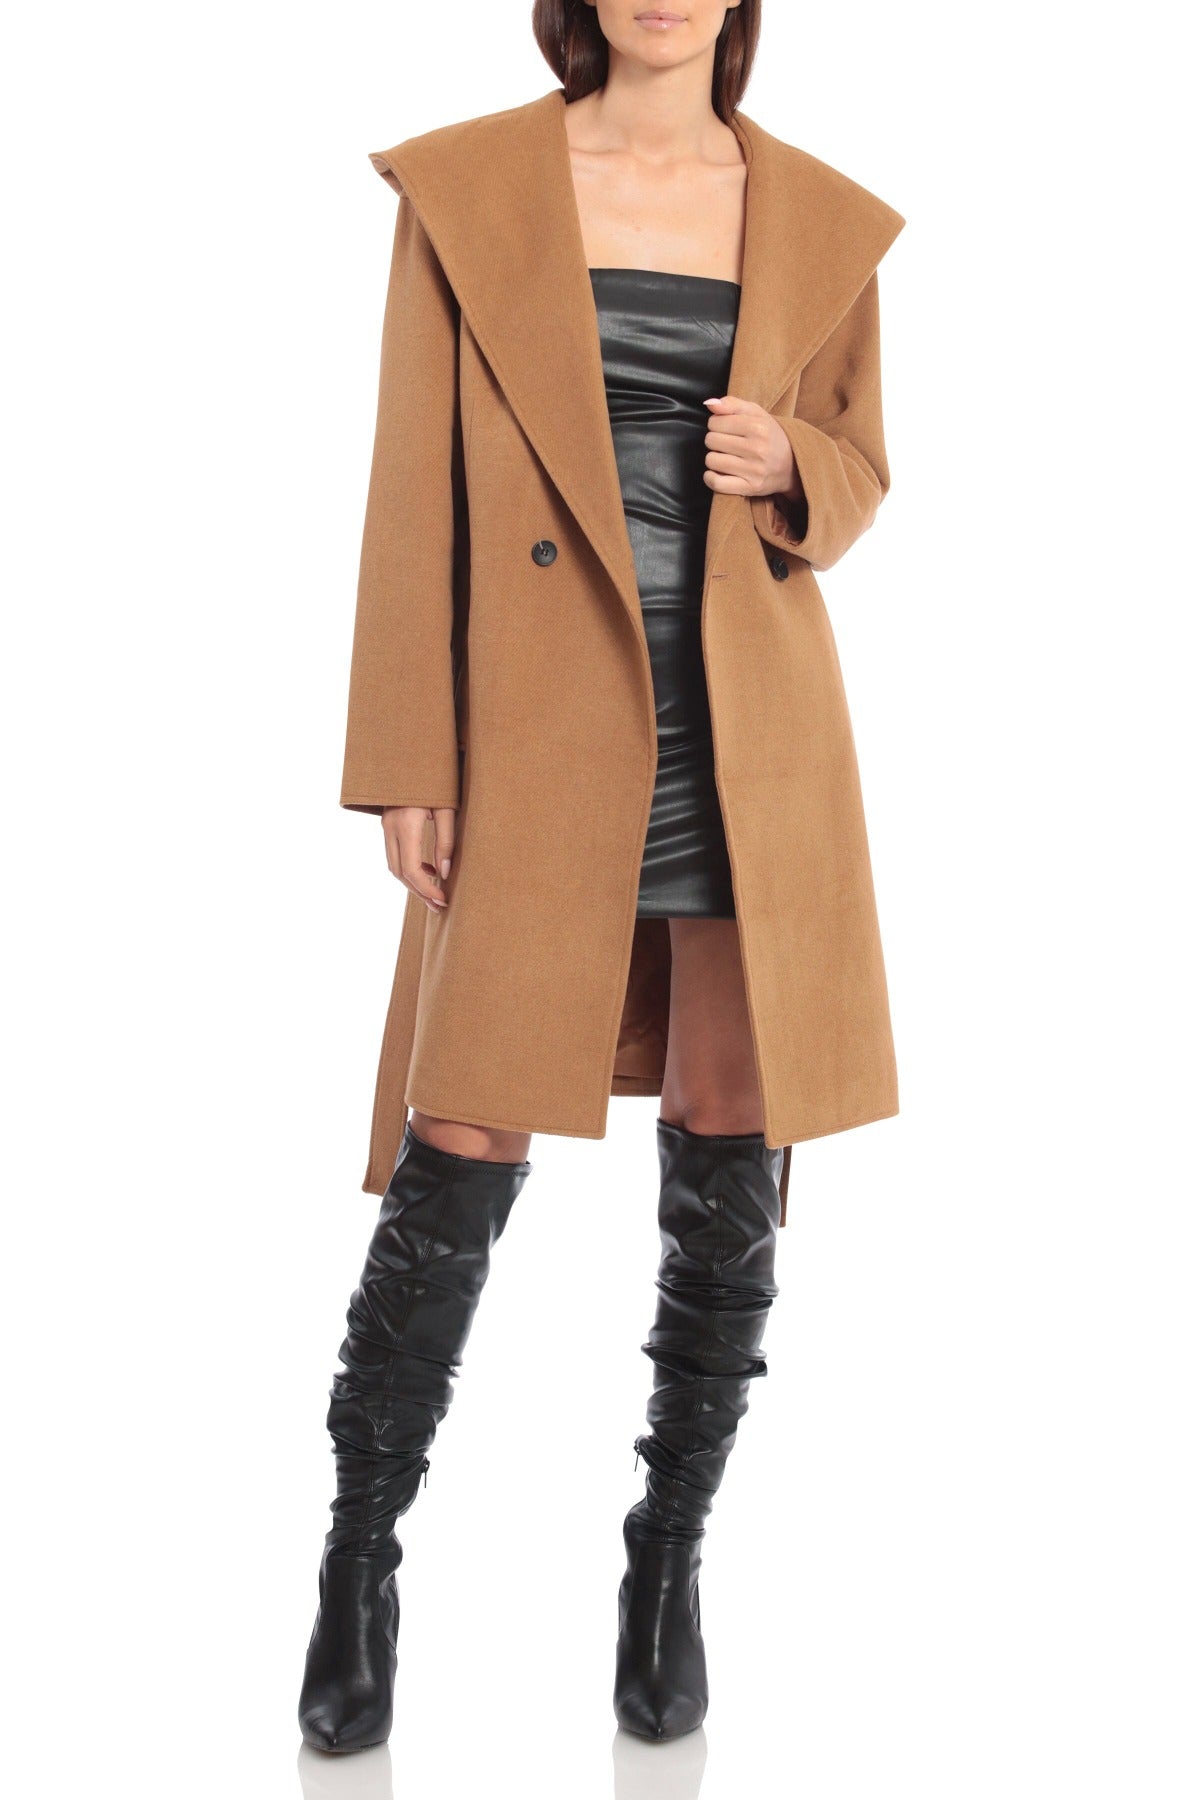 Brown hooded wool-blend belted midi coat jacket for women's Fall fashion by Avec Les Filles